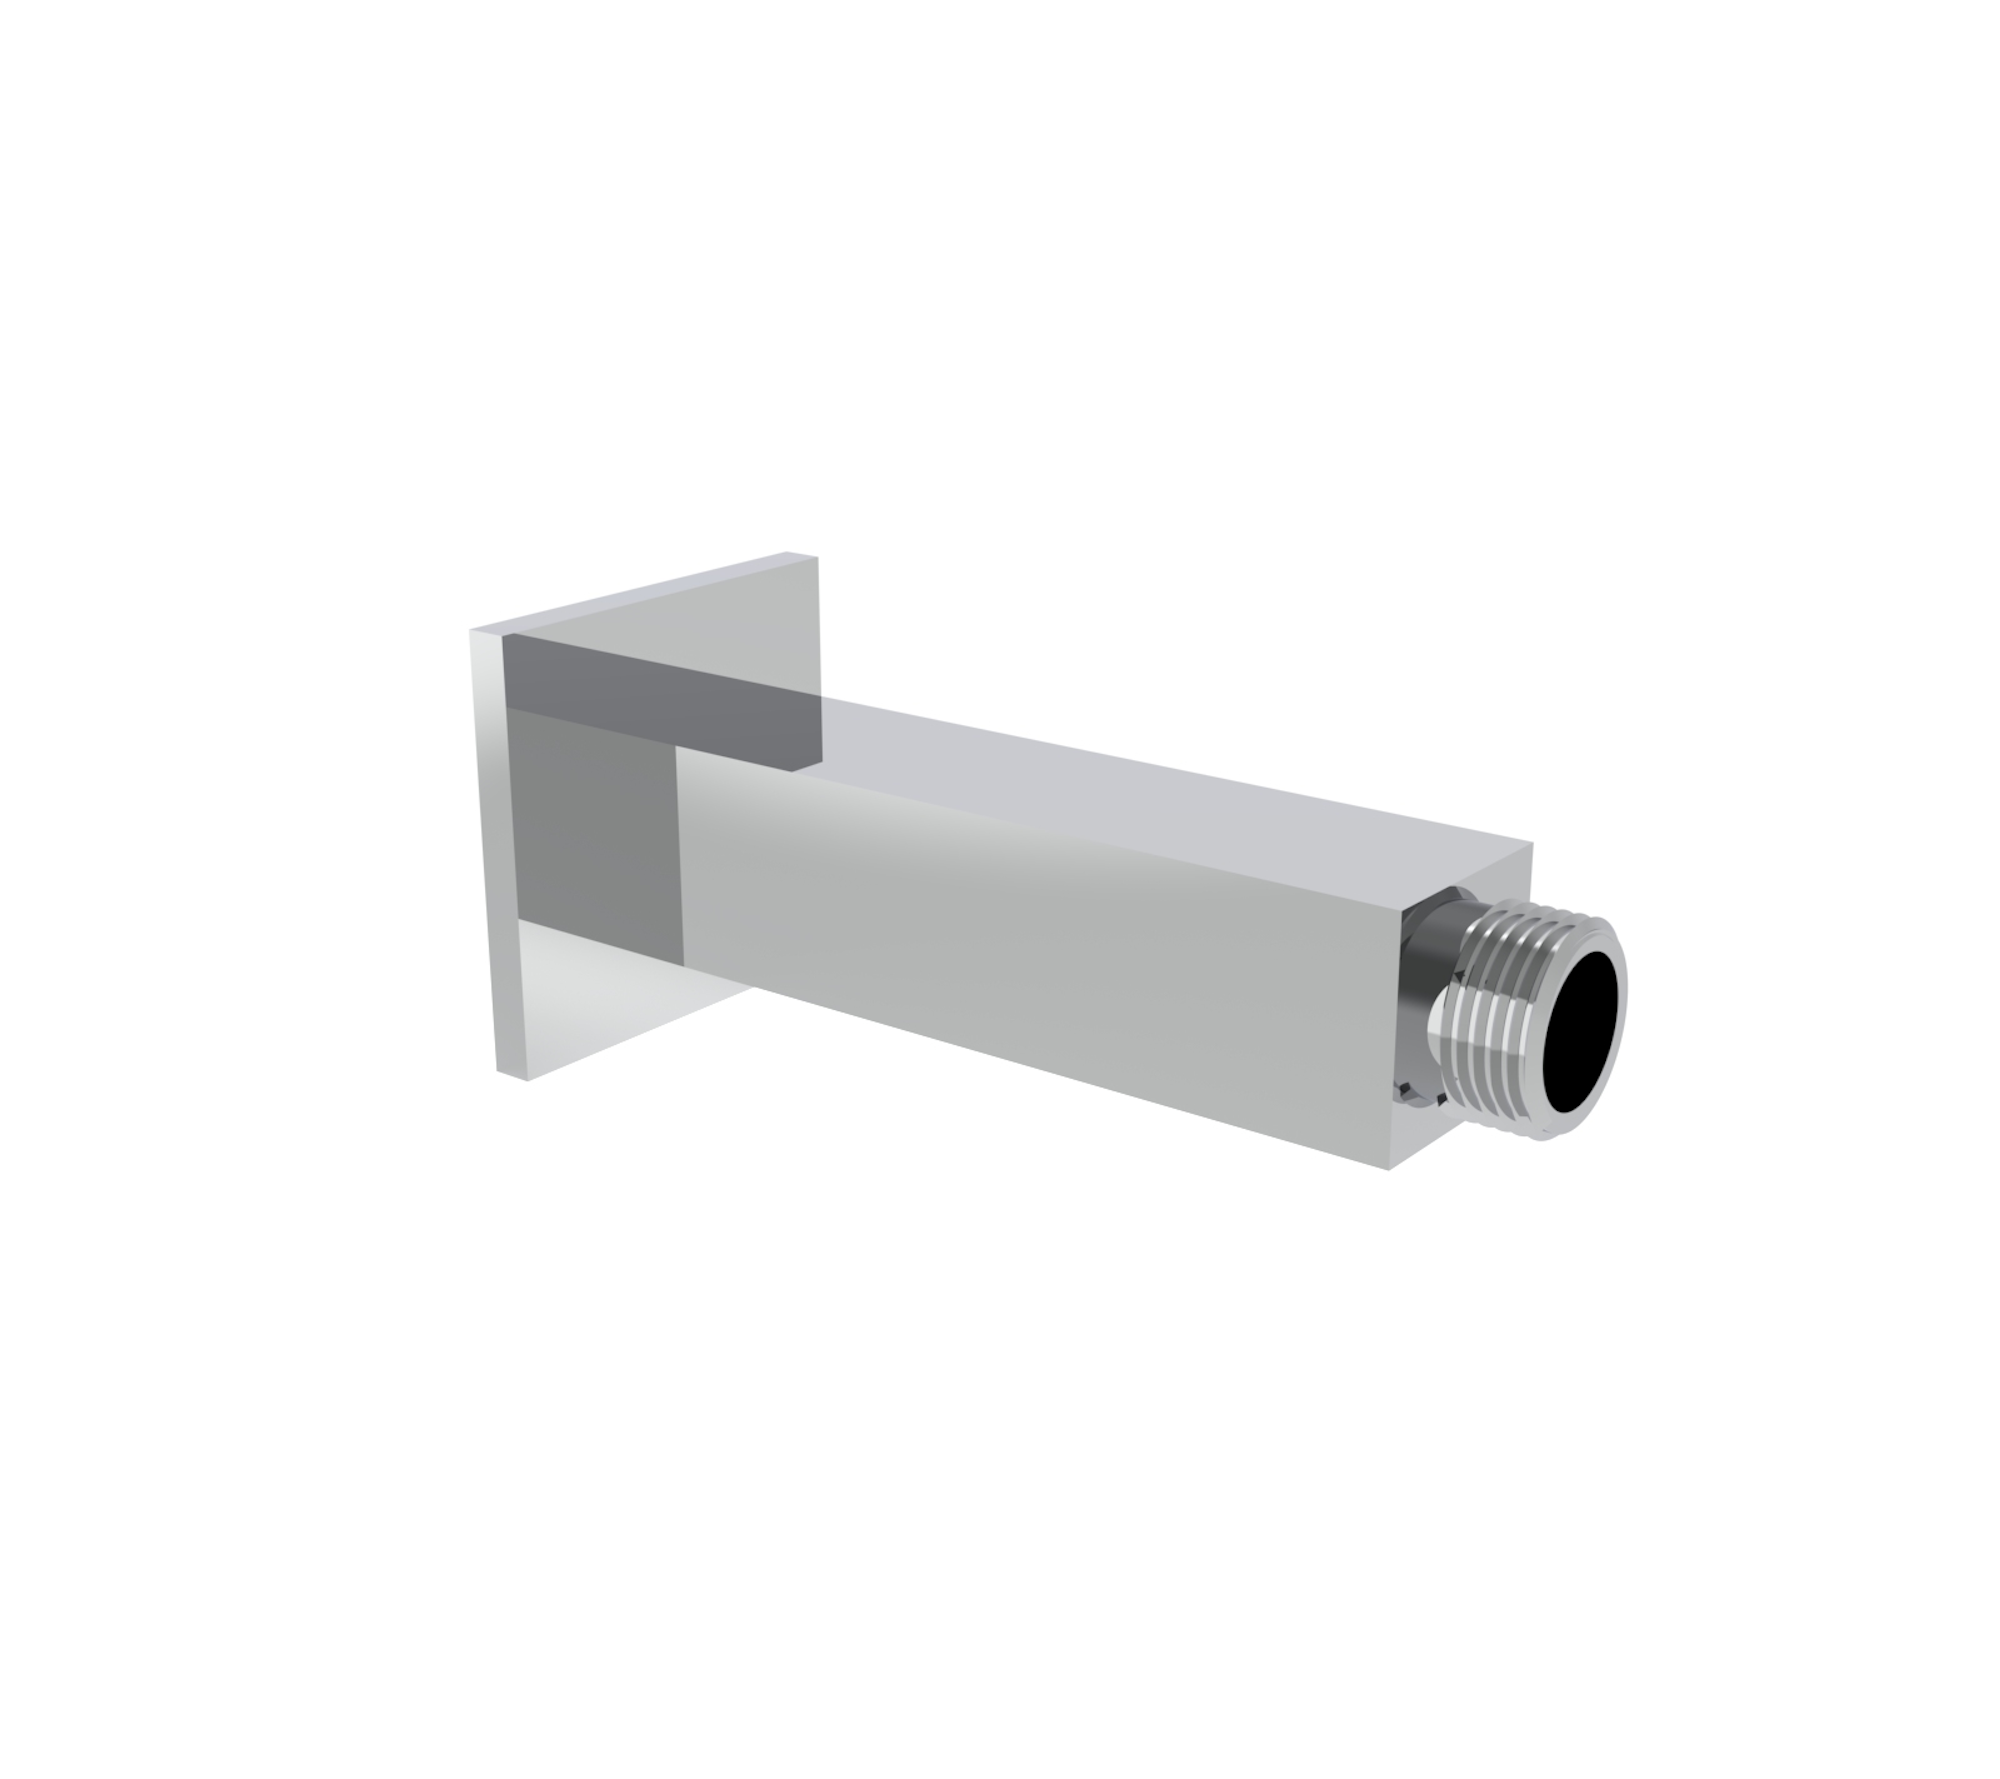 TOOGA 100mm square ceiling mounted shower arm - Chrome